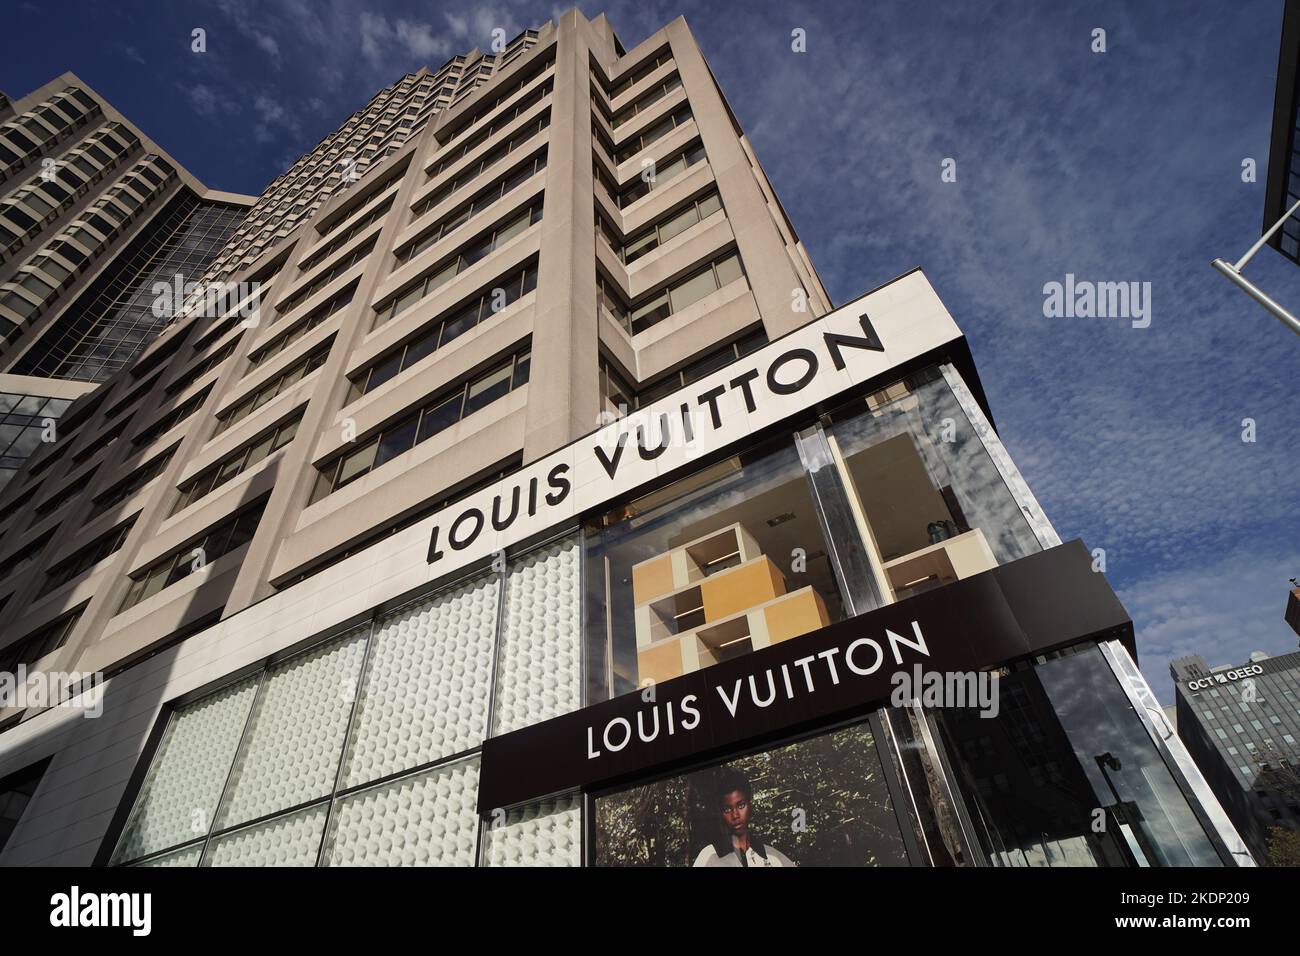 Louis Vuitton Storefront At The Blooryorkville Business Area In Toronto  Ontario Canada Stock Photo - Download Image Now - iStock